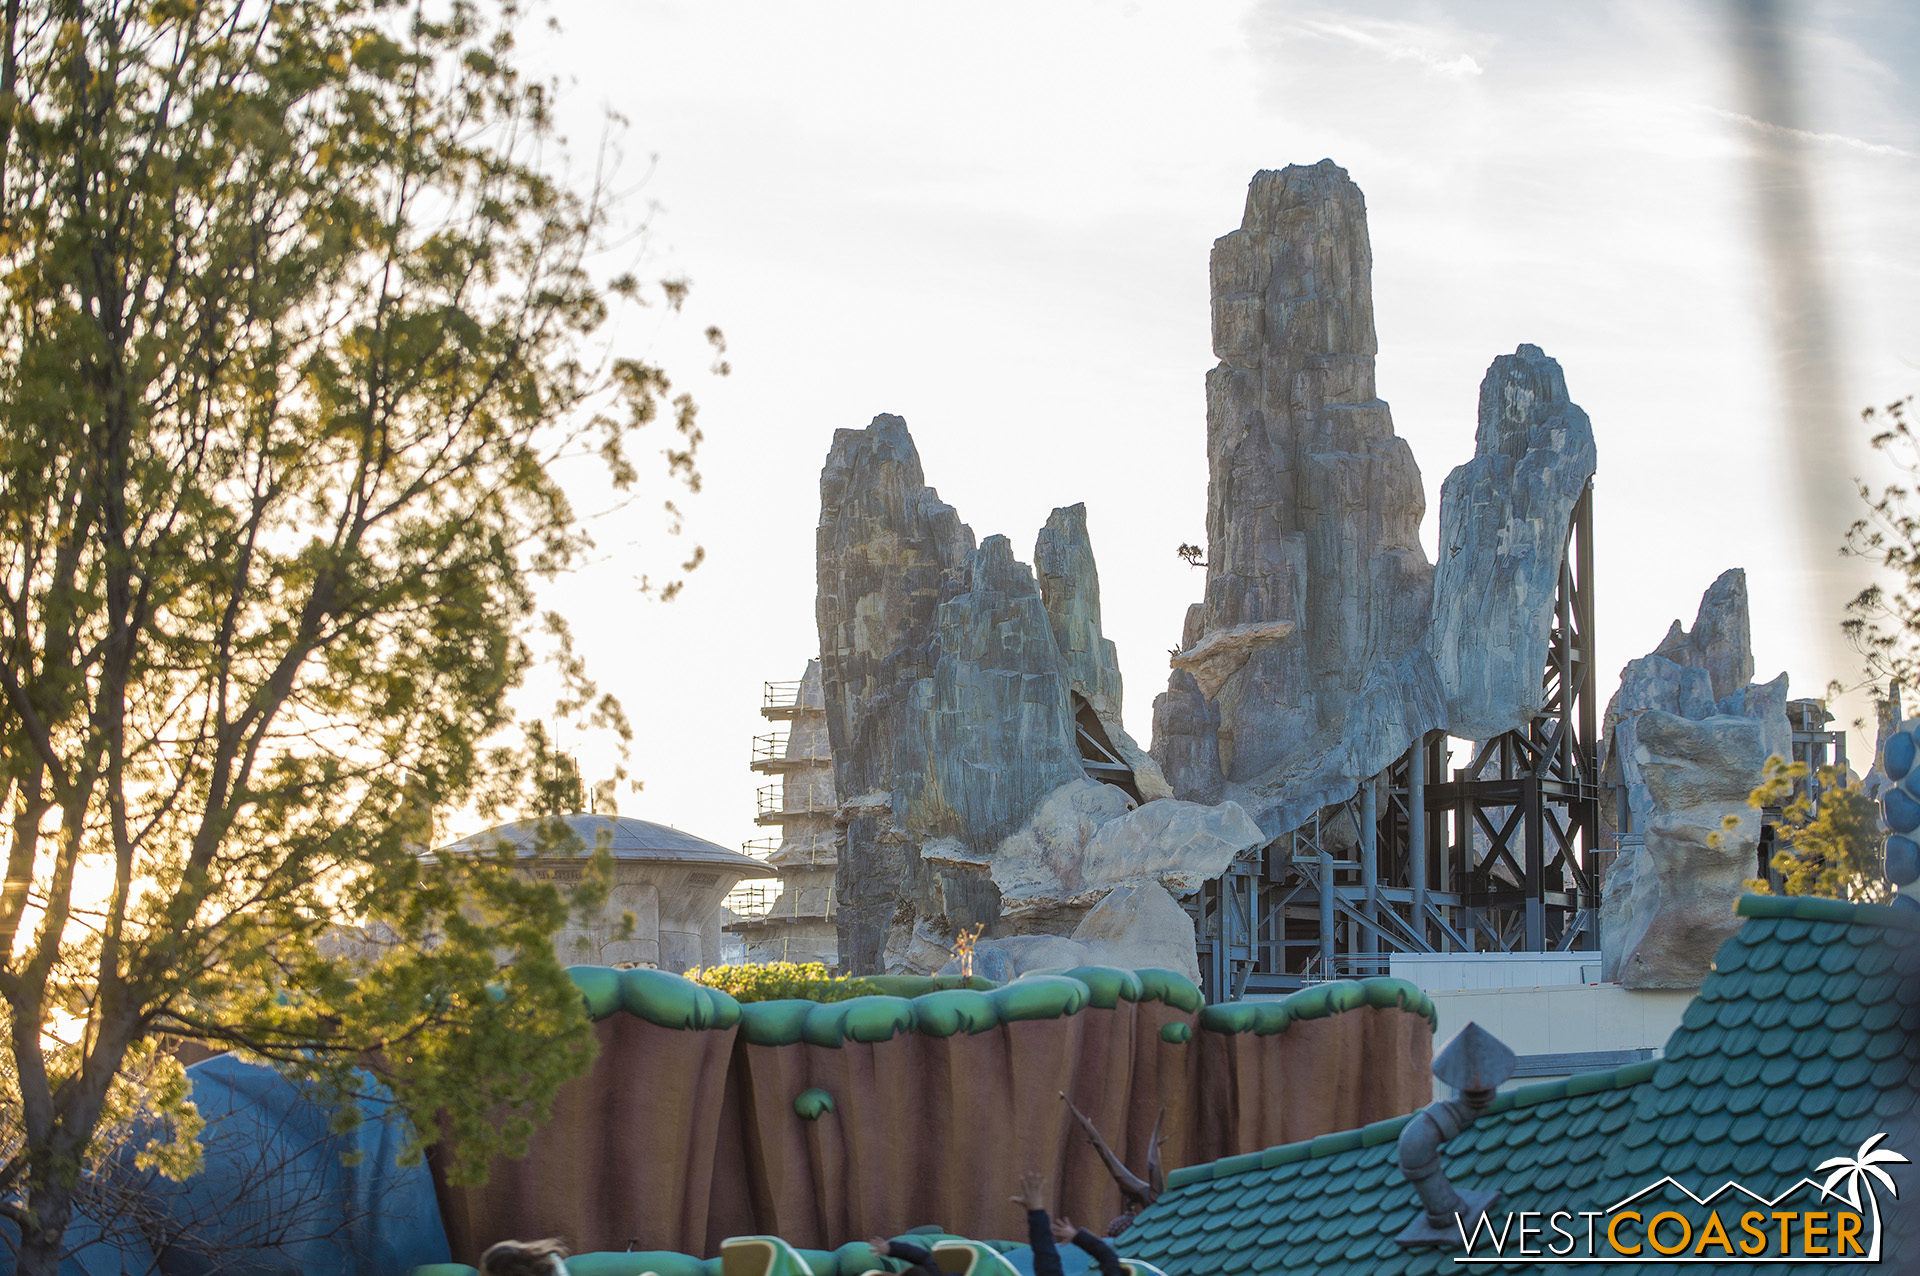  Galaxy’s Edge also promises a level of hyper-realism and detail that is unprecedented. 